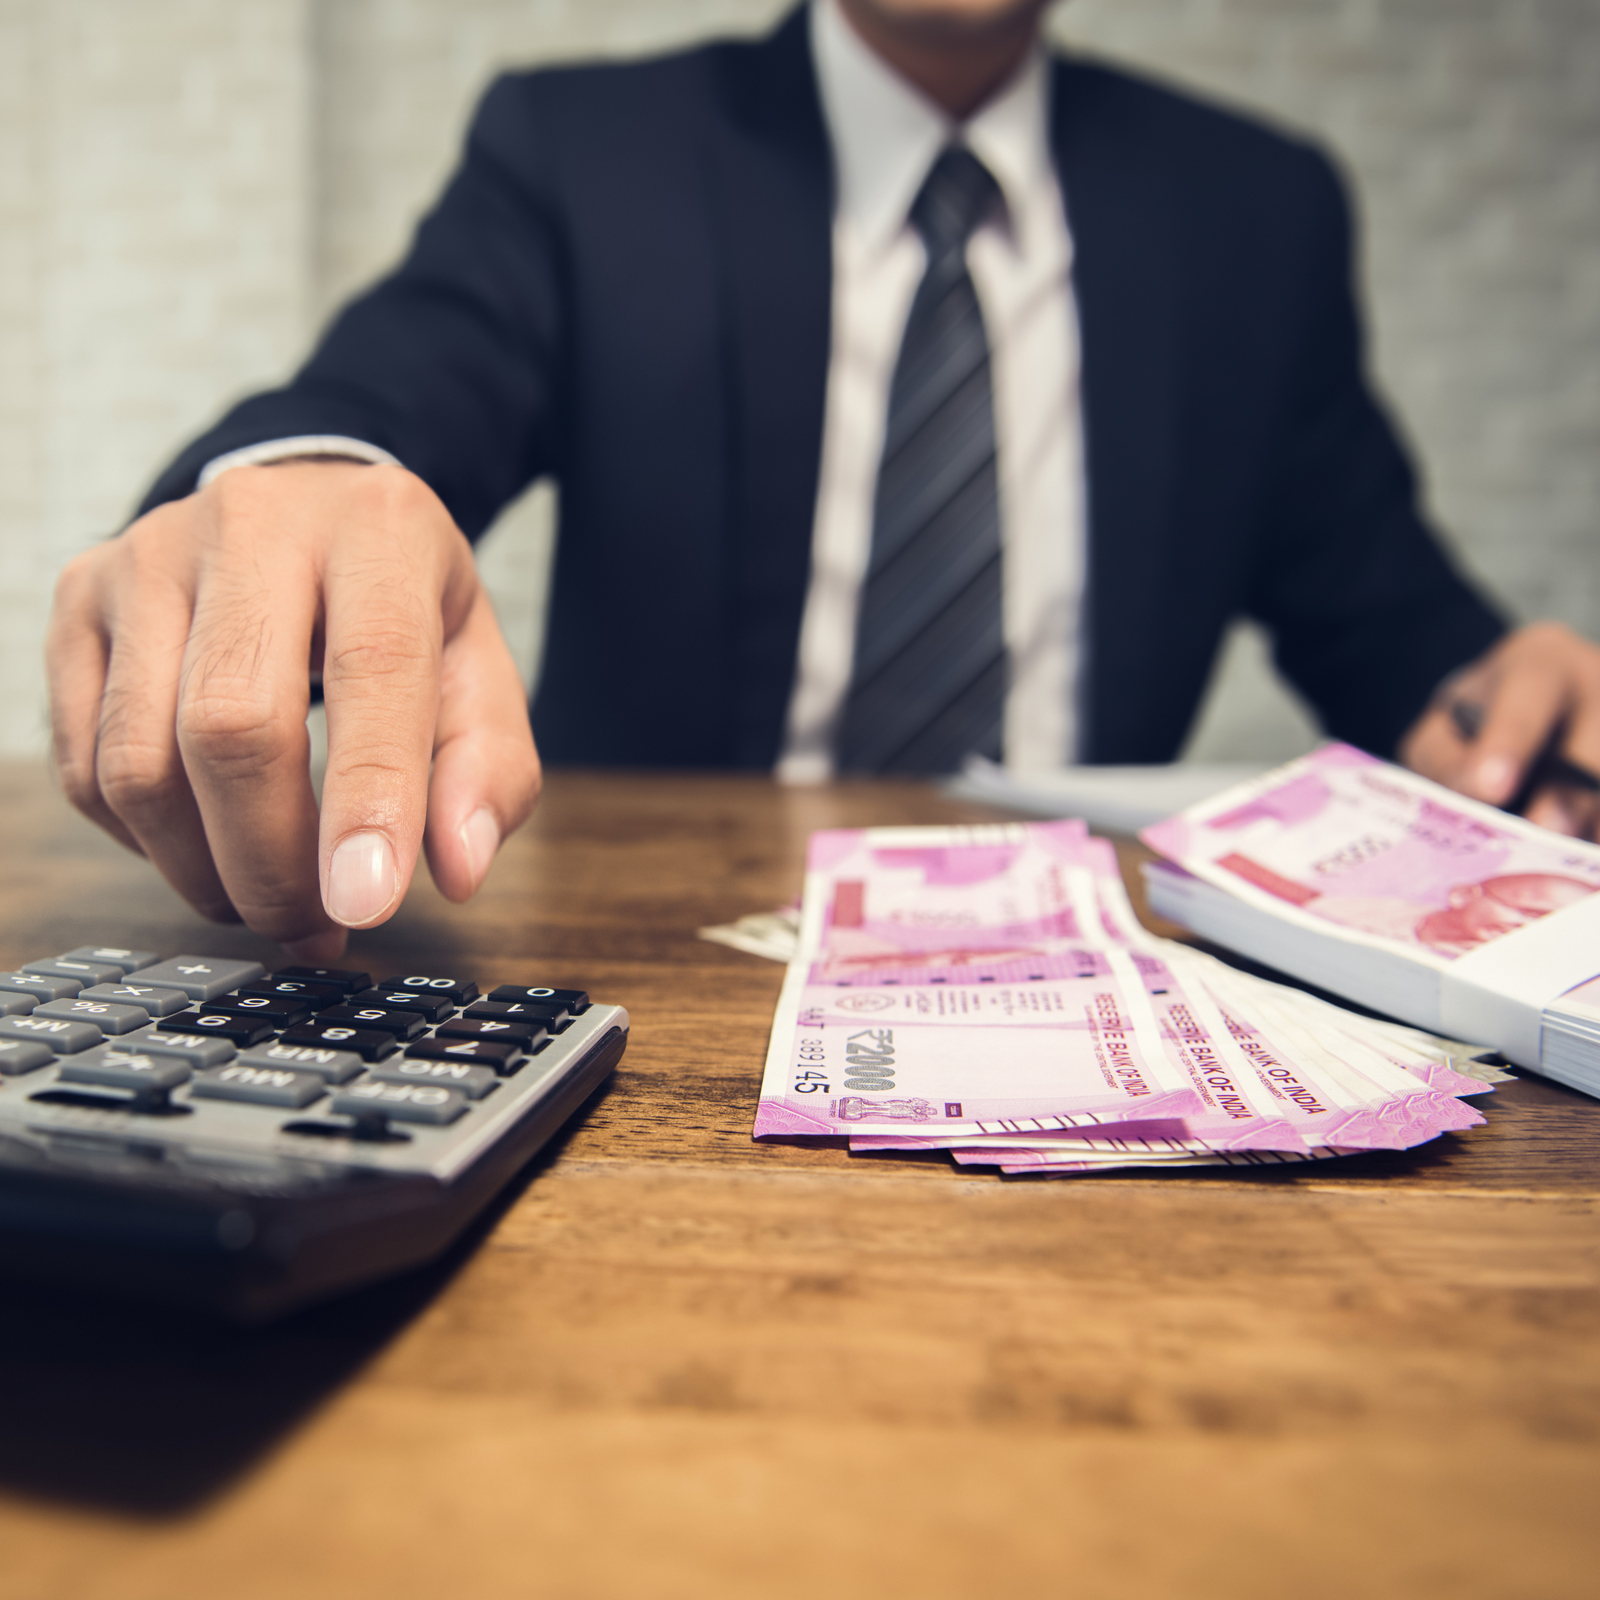 While Bitcoin Trades Above $19K In India — Tax Officials Are Snooping for Gains